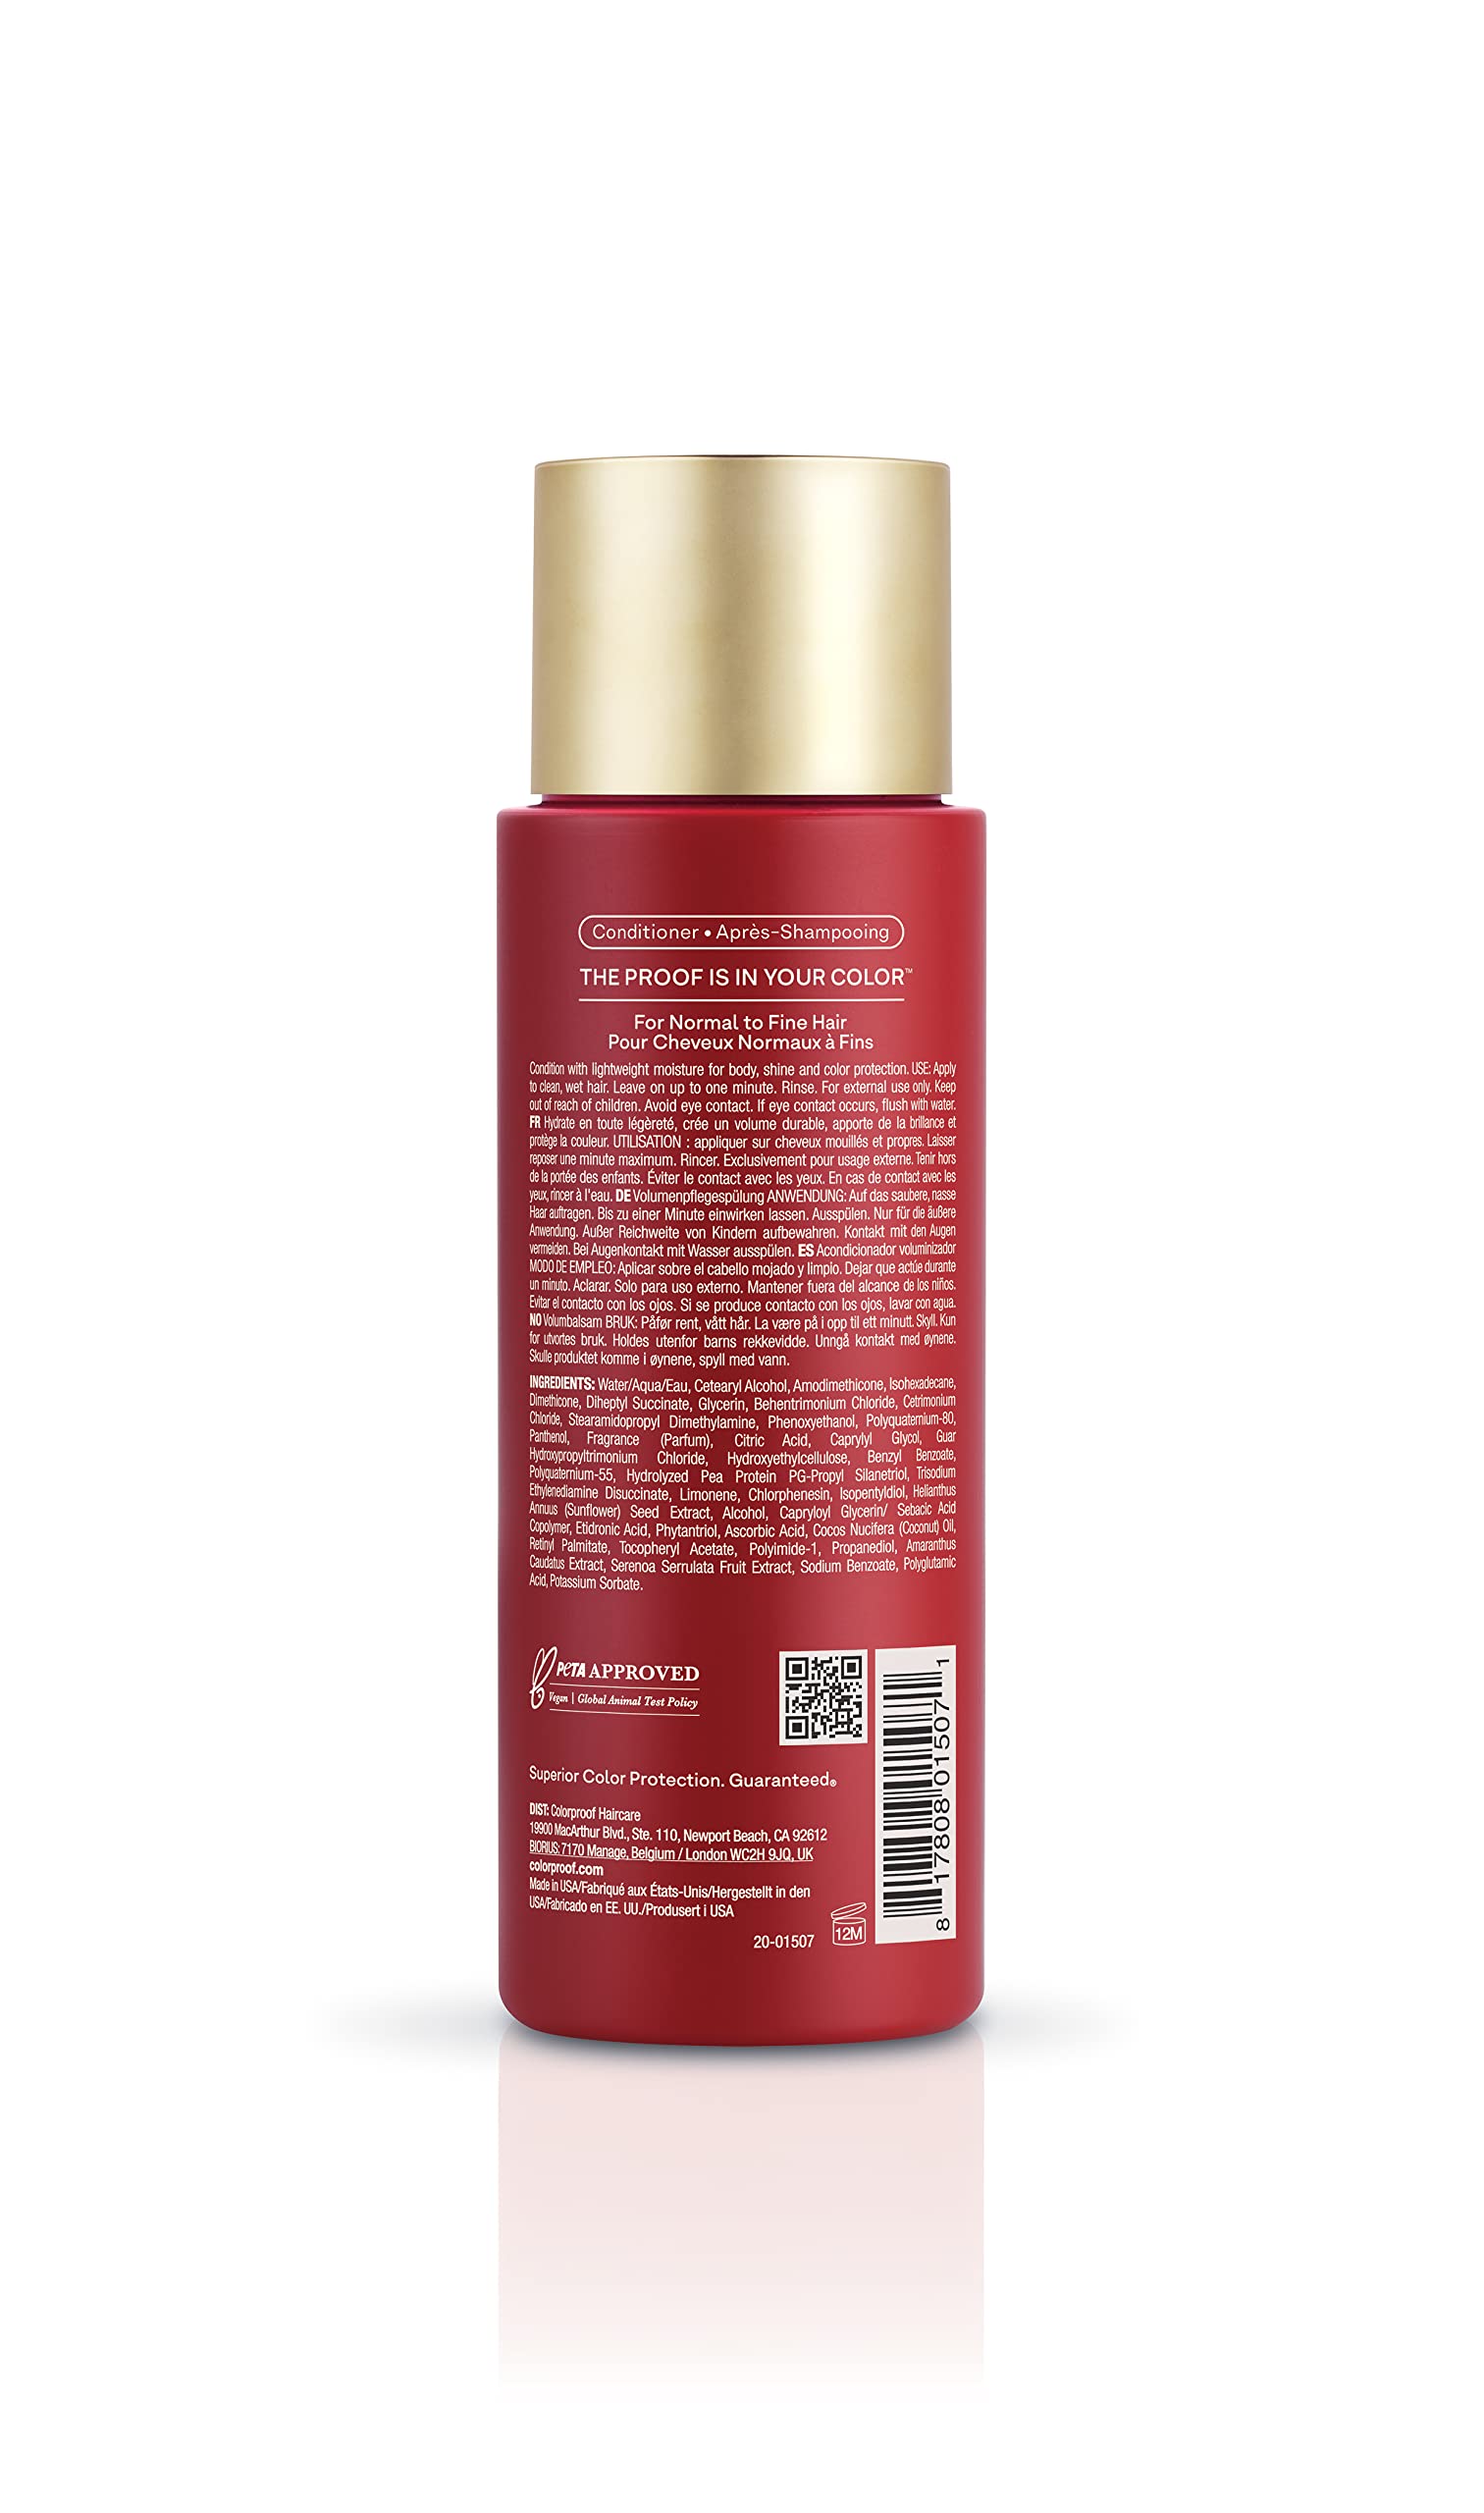 ColorProof Volume Conditioner, 8.5oz - For Fine Color-Treated Hair, Lightweight Volume & Body, Sulfate-Free, Vegan